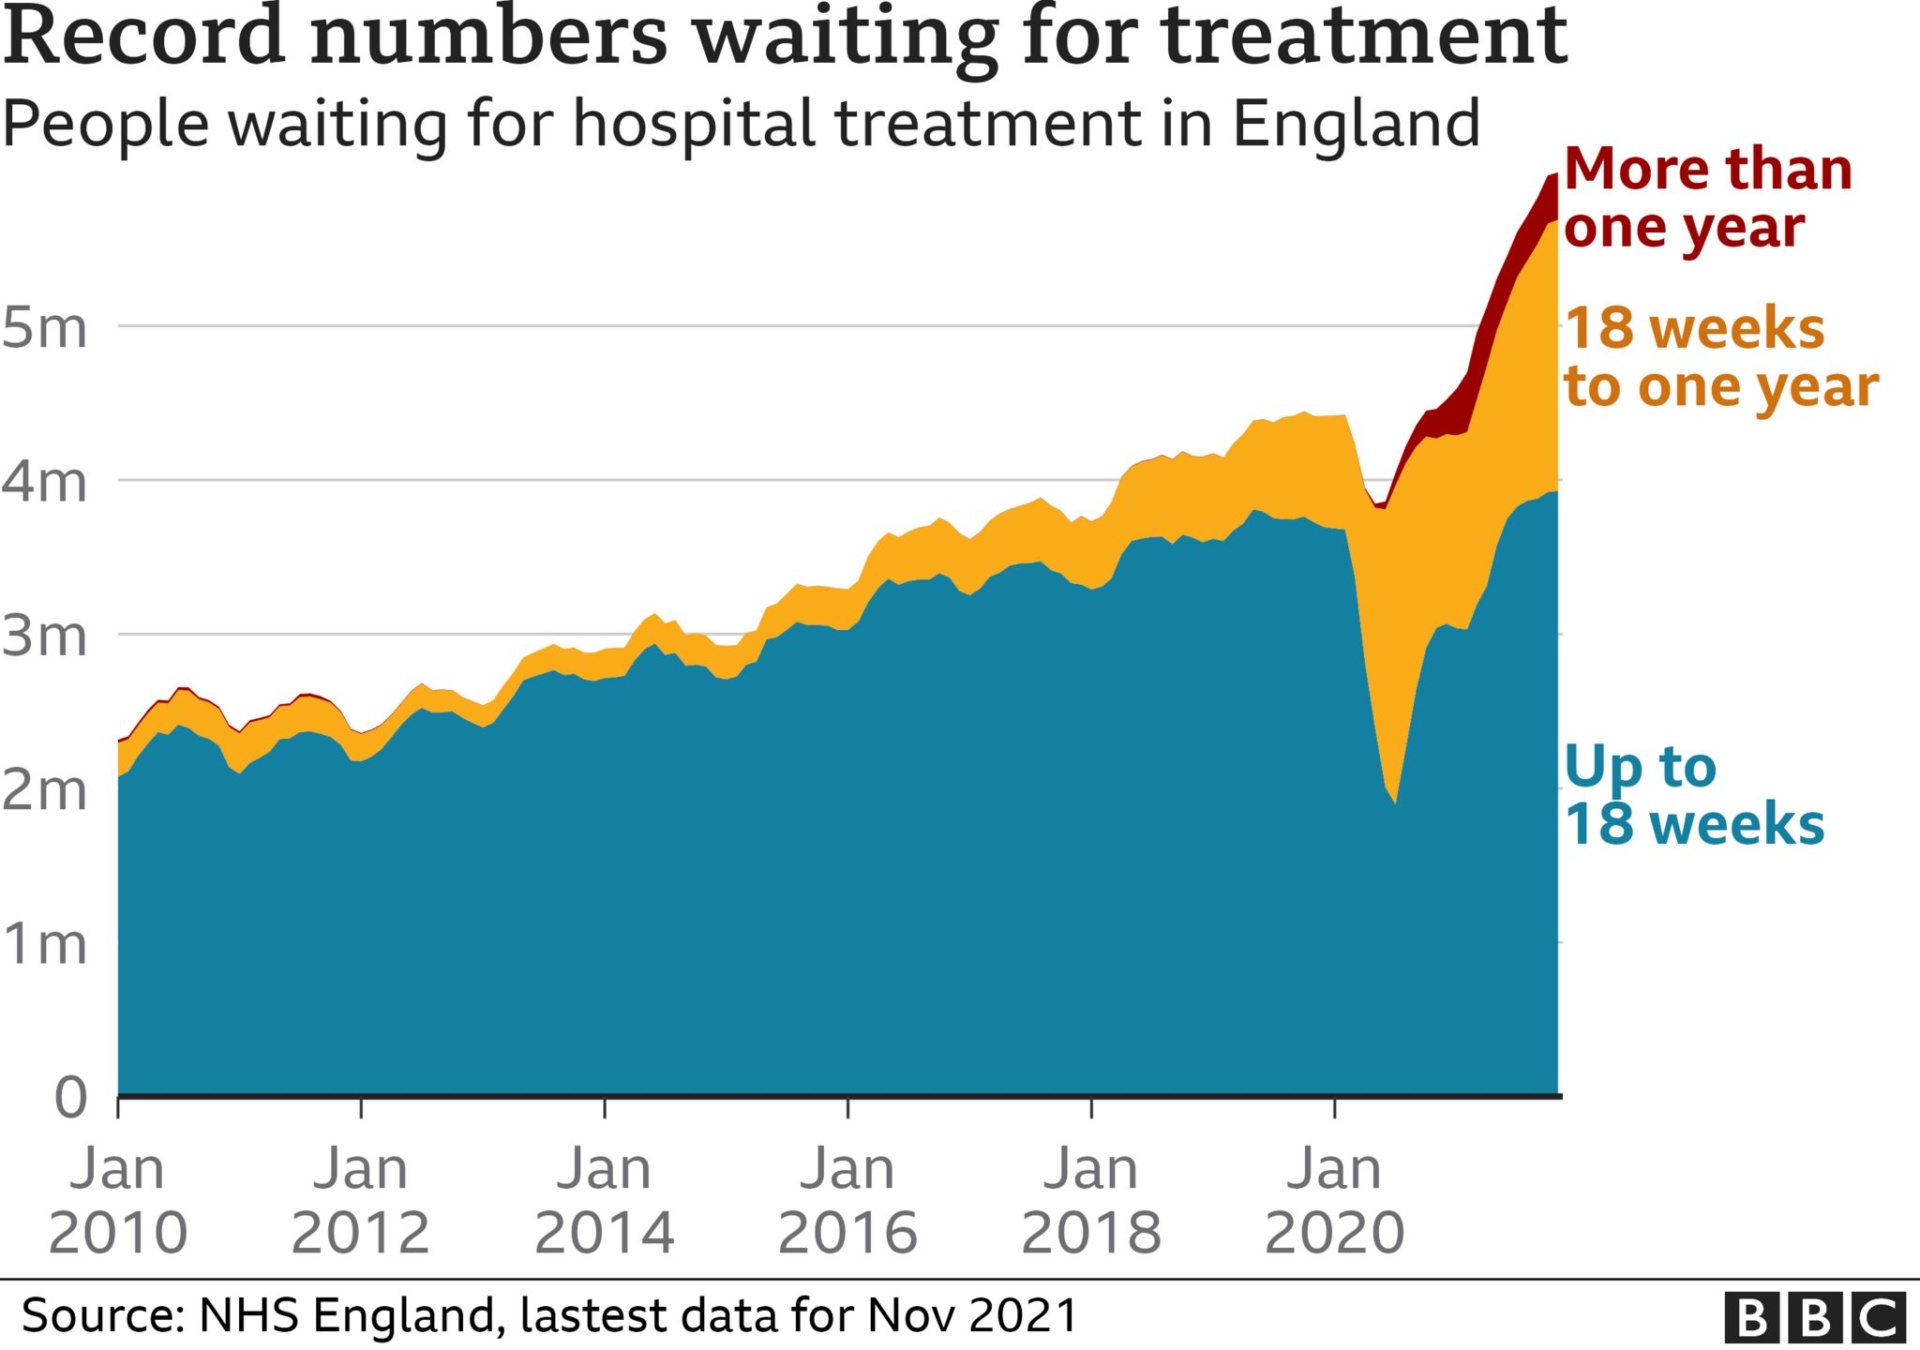 Graph showing record numbers waiting for hospital treatment in England